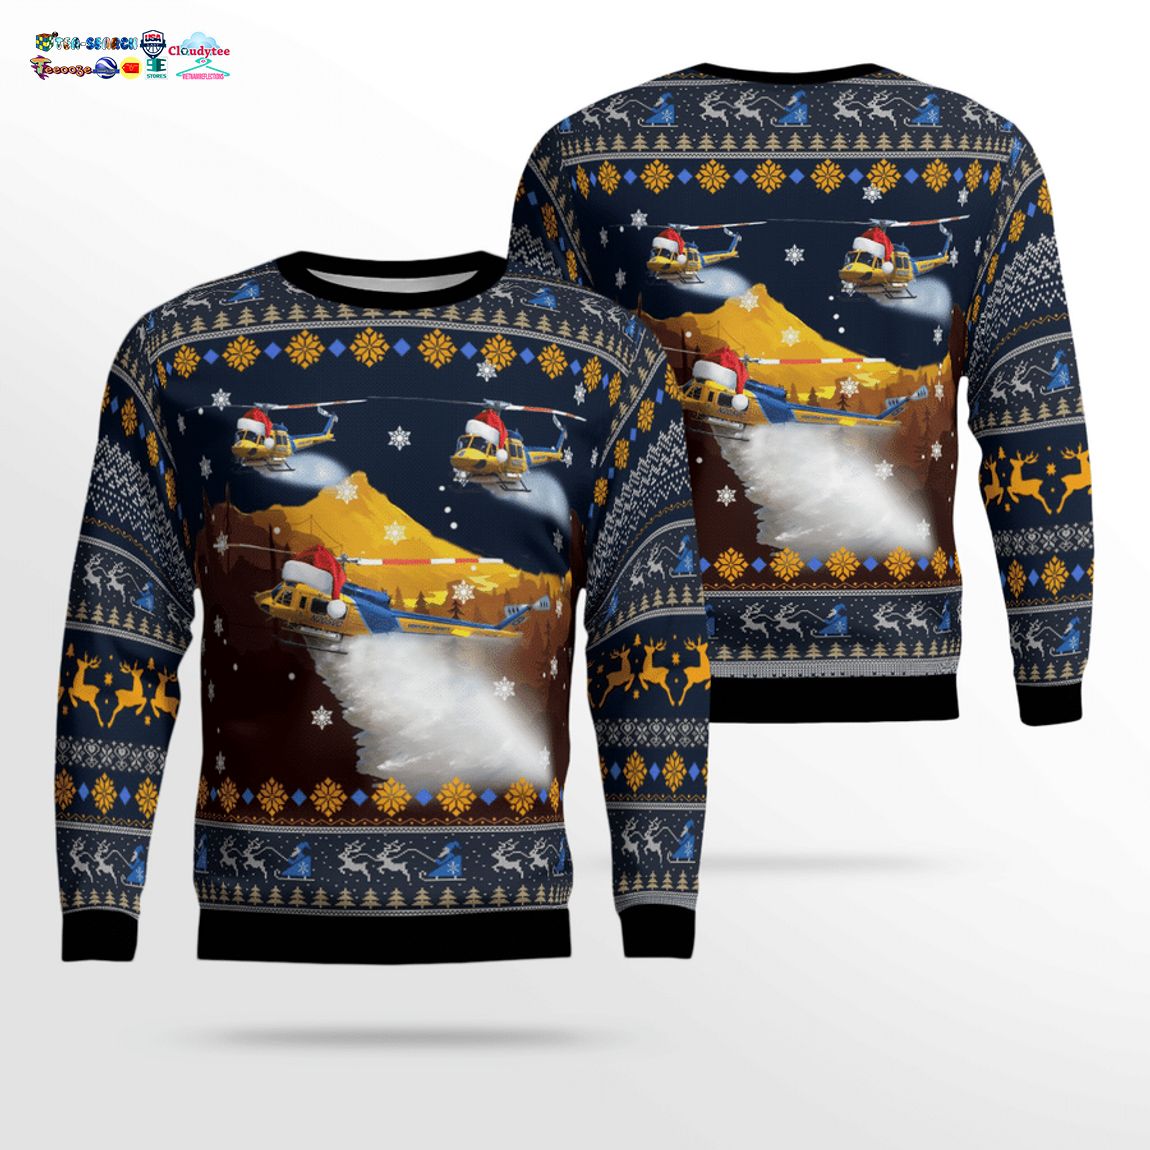 ventura-county-sheriff-fire-support-bell-205a-1-3d-christmas-sweater-1-gEsBW.jpg